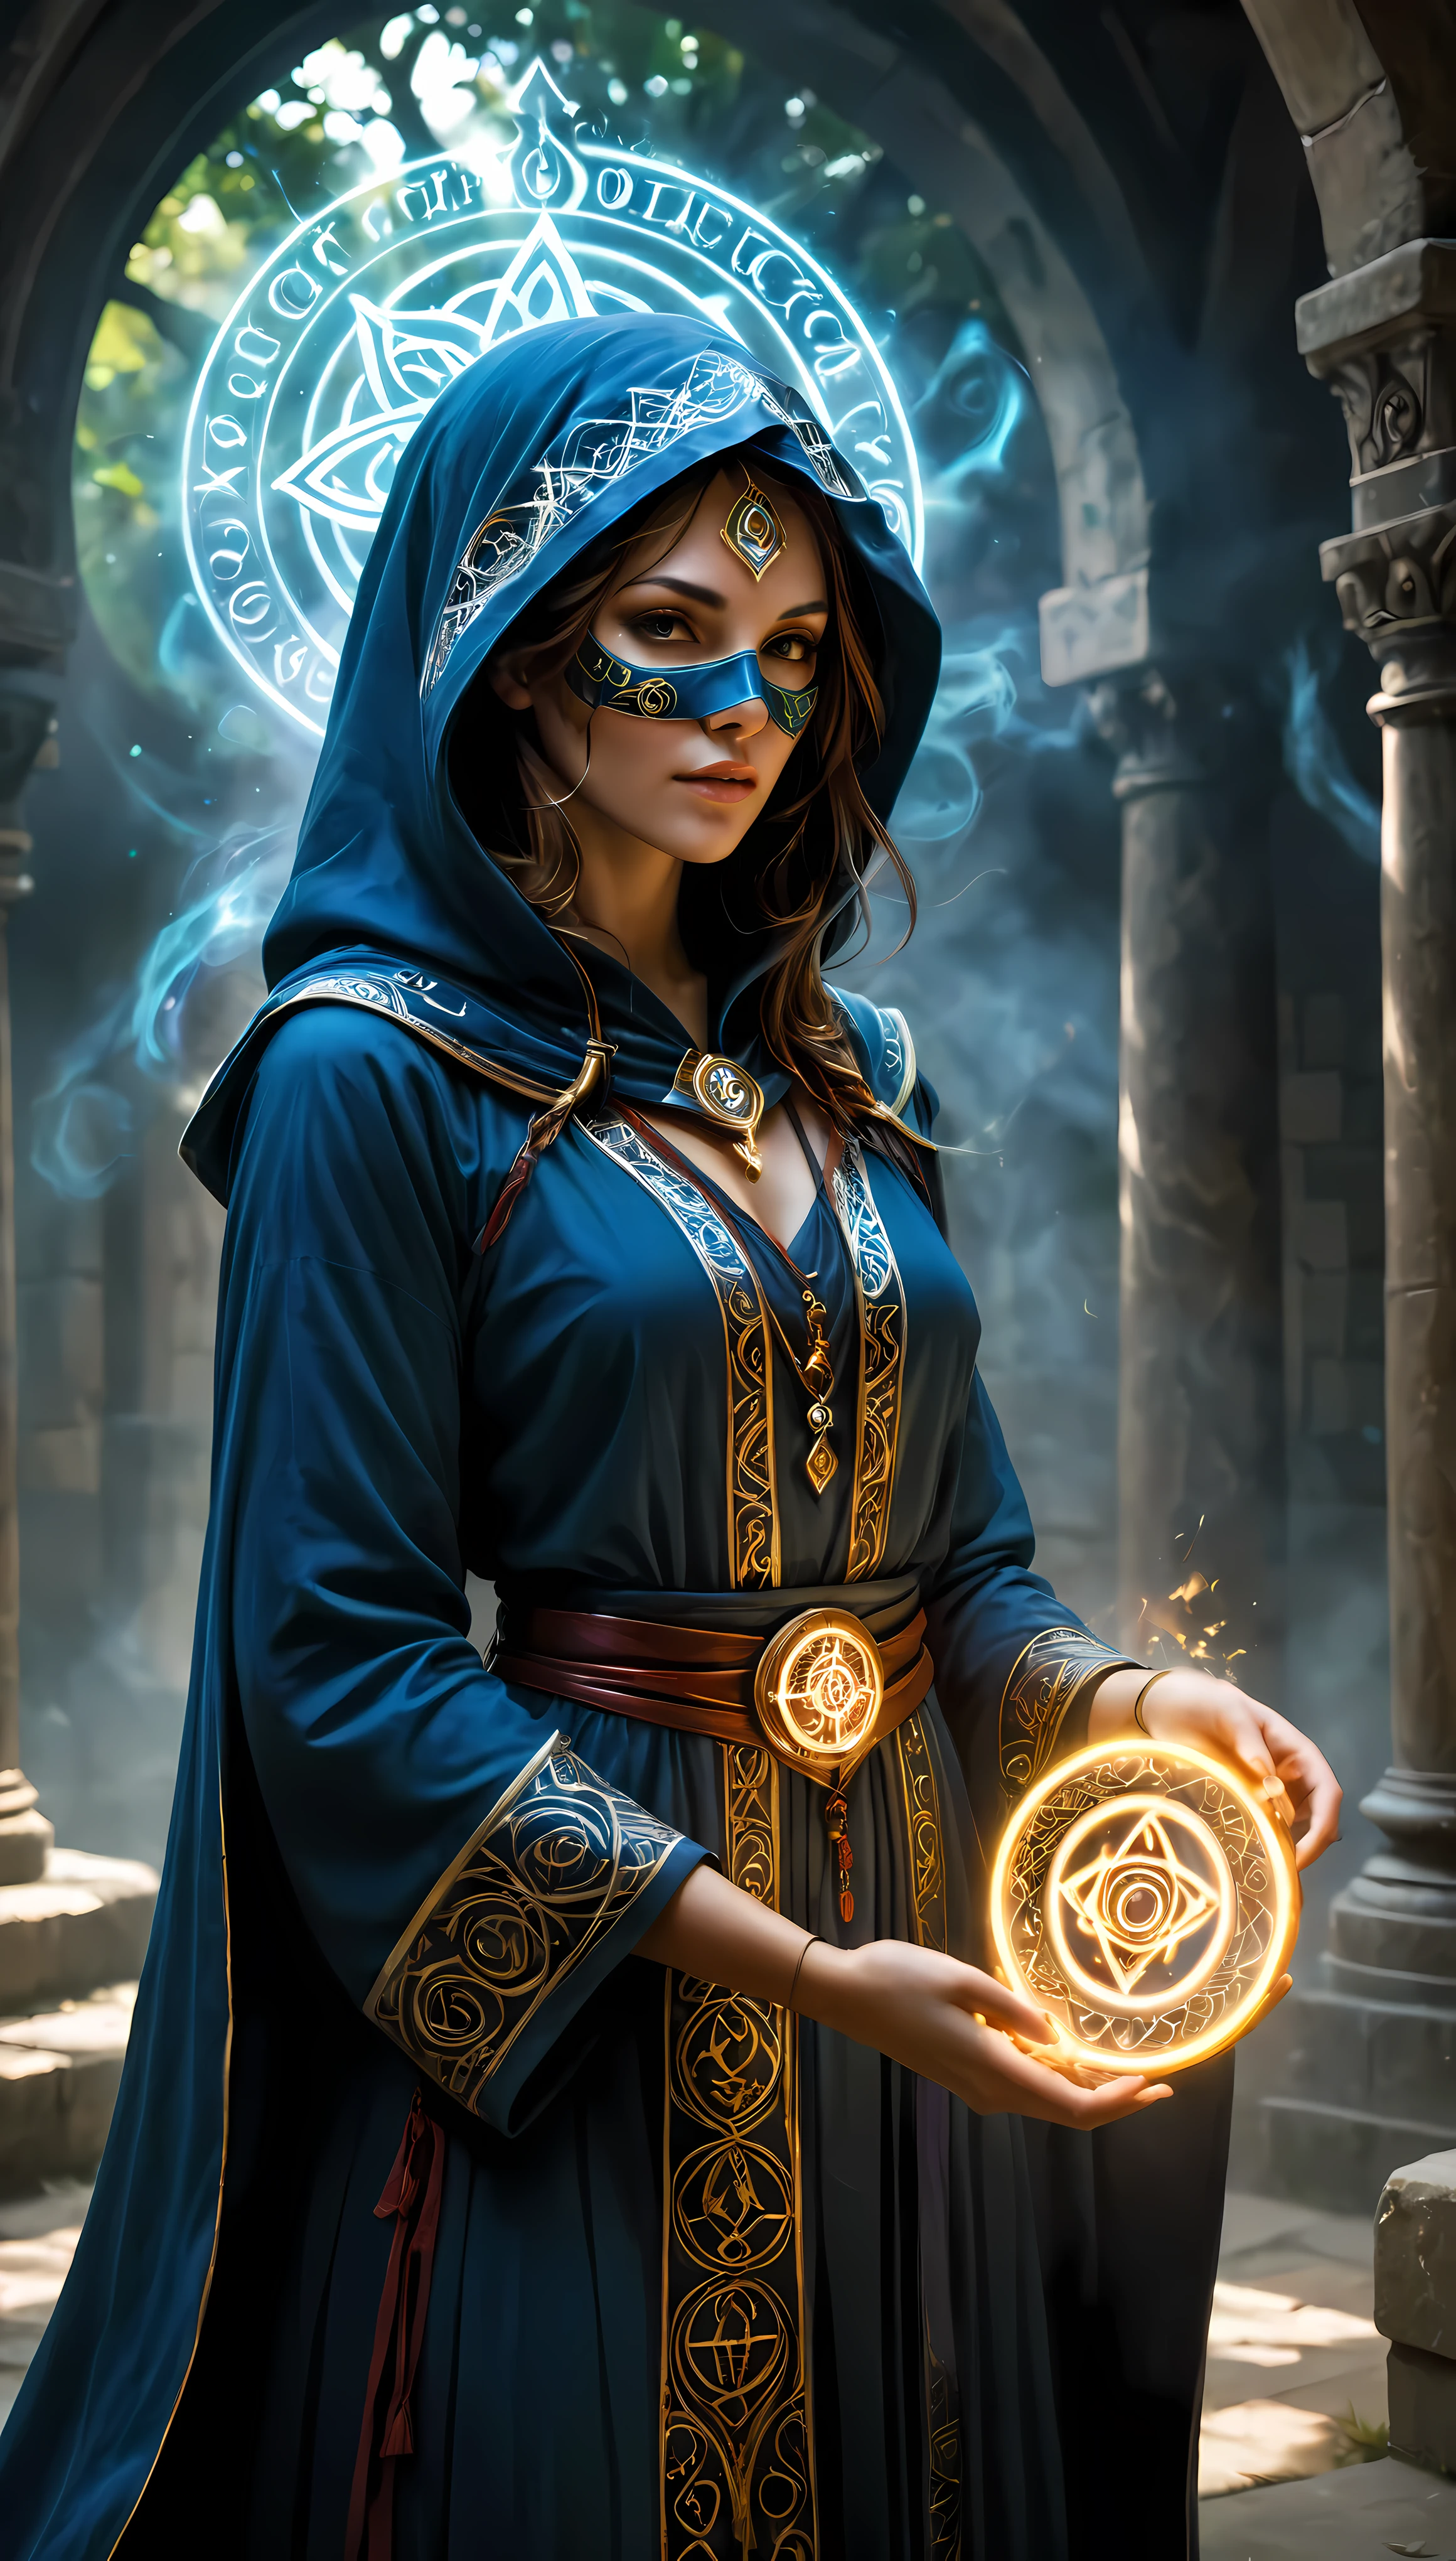 Title: "Veiled Enchantment: Conjuring the Magic Circle with a Masked Mage"

Prompt:

1. Begin by crafting a masked female mage: standing tall and imposing, her features obscured by an ornate mask adorned with intricate designs.

2. Design the mage's attire: flowing robes embellished with symbols and sigils, hinting at her proficiency in the arcane arts.

3. Render the mask with realism and detail, incorporating subtle textures and reflections to convey its craftsmanship and mystique.

4. Position the mage above the magic circle, her stance commanding and poised, as she prepares to unleash her powers upon the world.

5. Create the magic circle with meticulous precision: concentric rings of glowing runes and inscriptions etched into the ground, radiating with ethereal light.

6. Ensure the runes and inscriptions are legible yet cryptic, hinting at ancient languages and forgotten spells.

7. Illuminate the magic circle with a soft, pulsating glow, casting shadows and highlights that dance across the surrounding environment.

8. Integrate the mage's presence into the scene: subtle gestures and movements that indicate her control over the magic being channeled.

9. Consider the interaction between the mage and the magic circle: the intensity of her focus, the flow of energy between them, and the power she commands.

10. Surround the mage with elements of mystery and intrigue: swirling mists, flickering flames, or spectral apparitions that enhance the sense of enchantment.

11. Pay attention to lighting and shadows: position light sources to accentuate the mage's silhouette and the intricate details of the magic circle.

12. Maintain a balance between realism and fantasy, ensuring that the masked mage and her mystical surroundings evoke a sense of wonder and awe.

13. Throughout the process, prioritize attention to detail, composition, and the portrayal of the masked mage's enigmatic presence and mastery of the arcane.